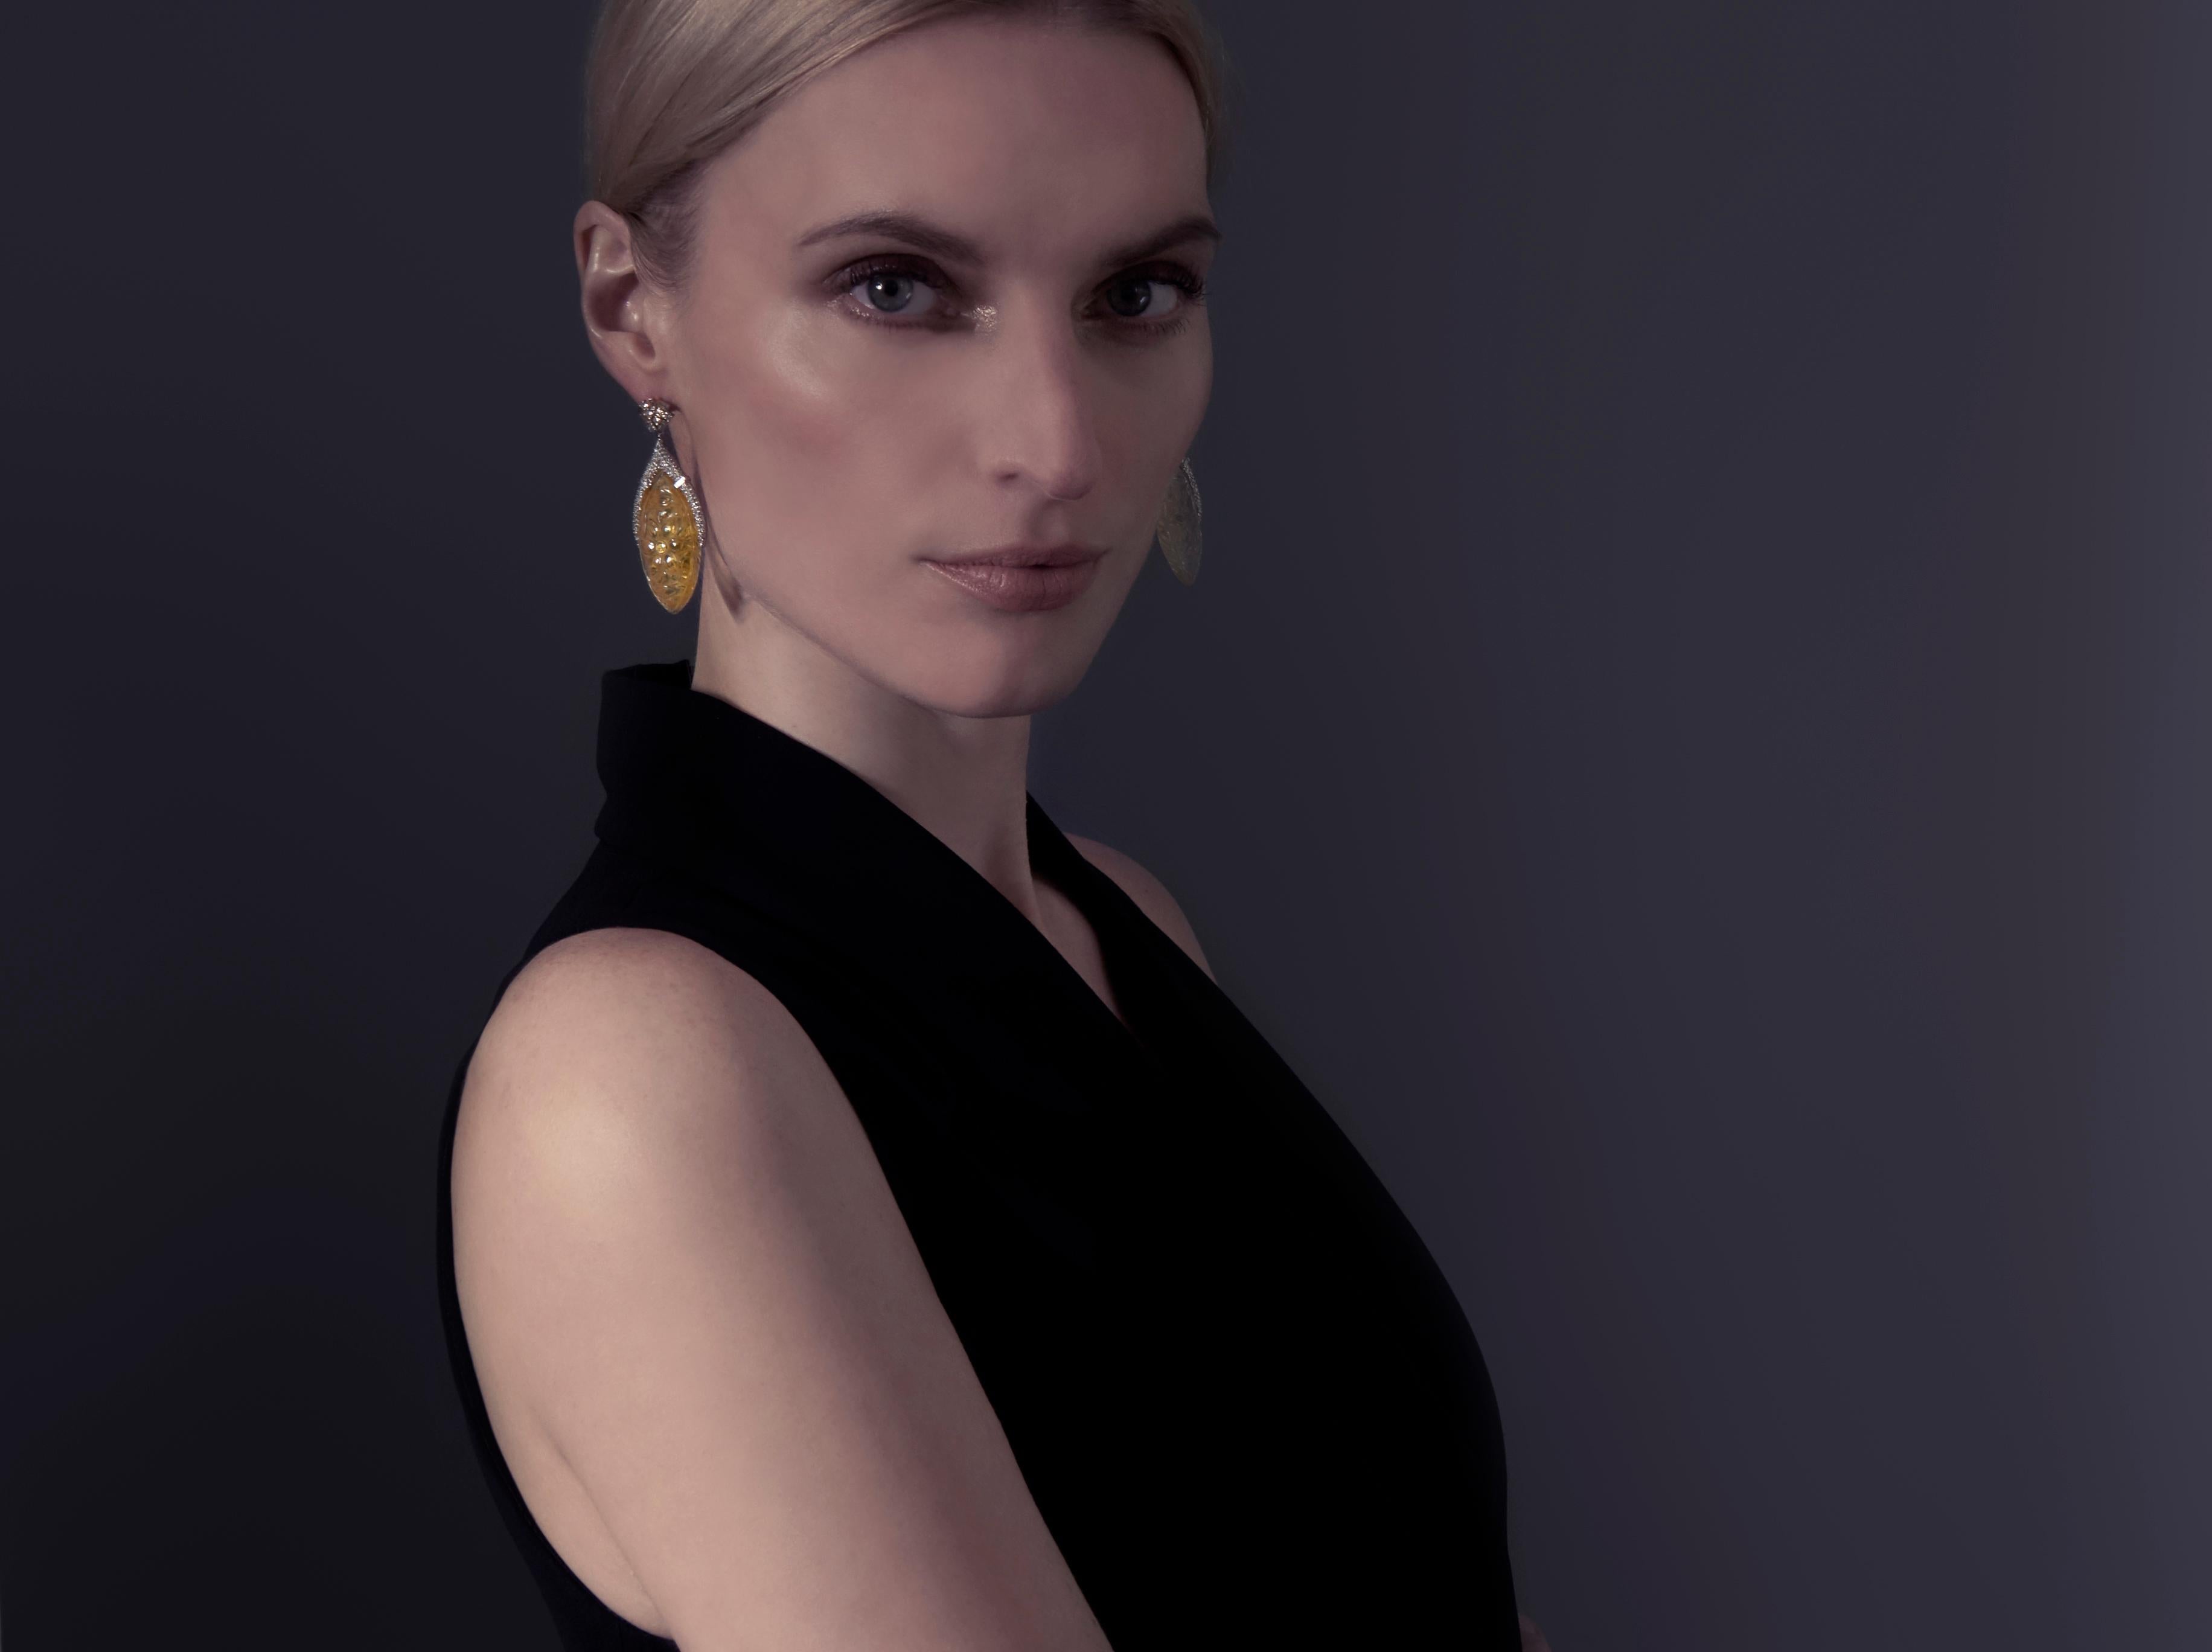 Exhibiting an attention to detail and craft, Ri Noor's Carved Citrine Earrings showcase a stunning display of gemstones that sparkle in the light. The earrings mix shapes and materials in a unique way which makes a special statement that elevates